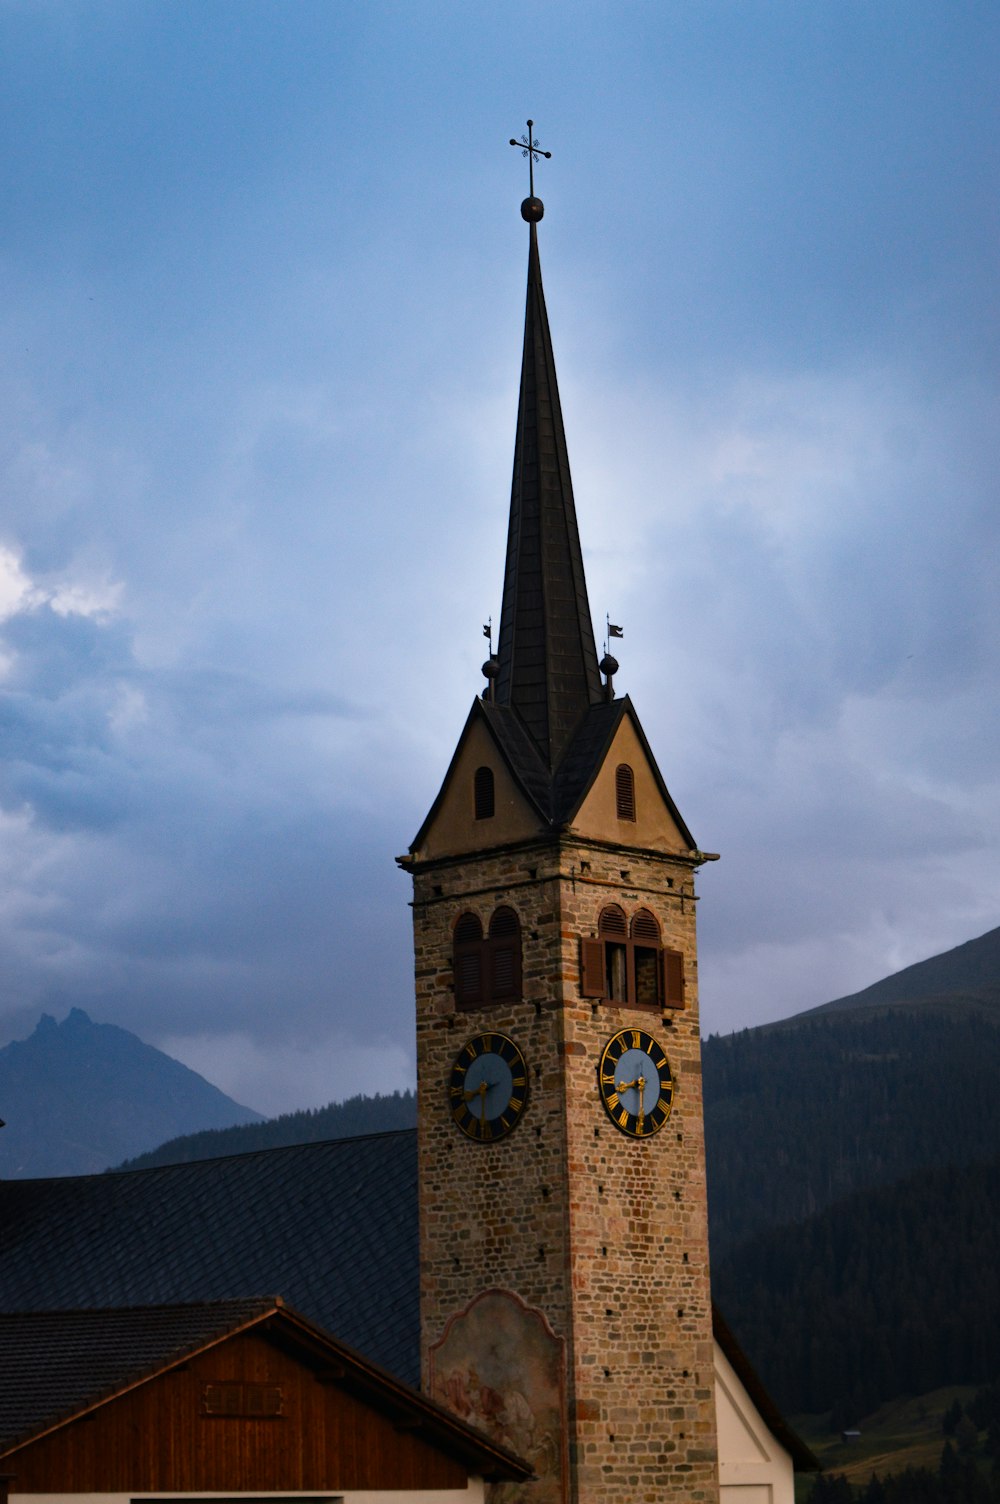 church tower with clock displaying 8:30 time during day